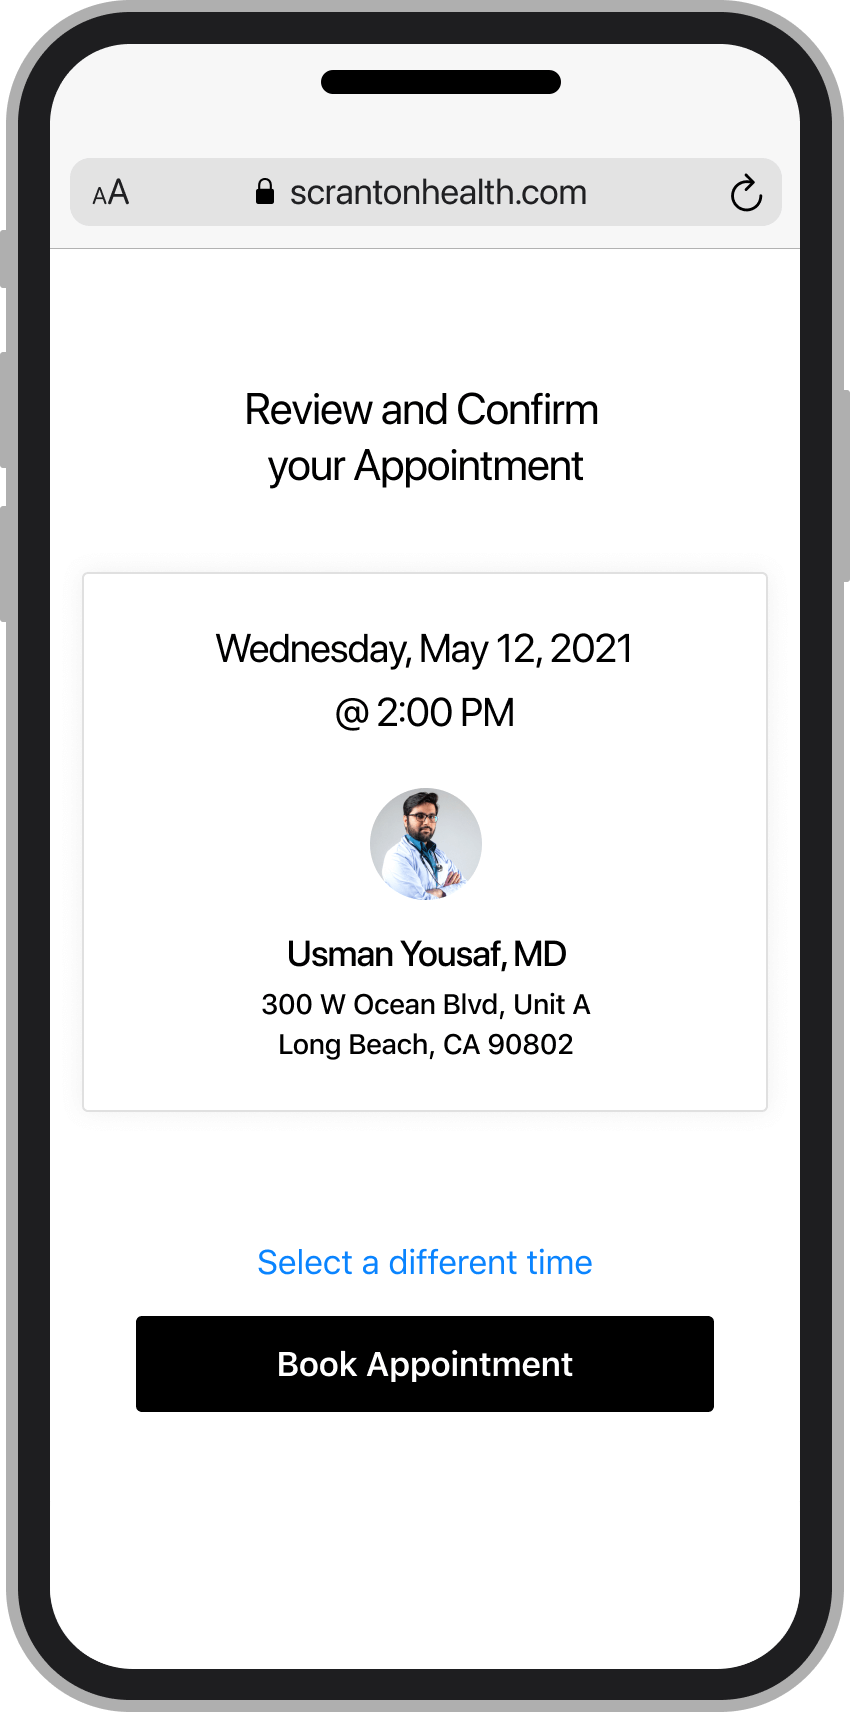 Mobile phone screen showing final appointment detail review with button to book appointment